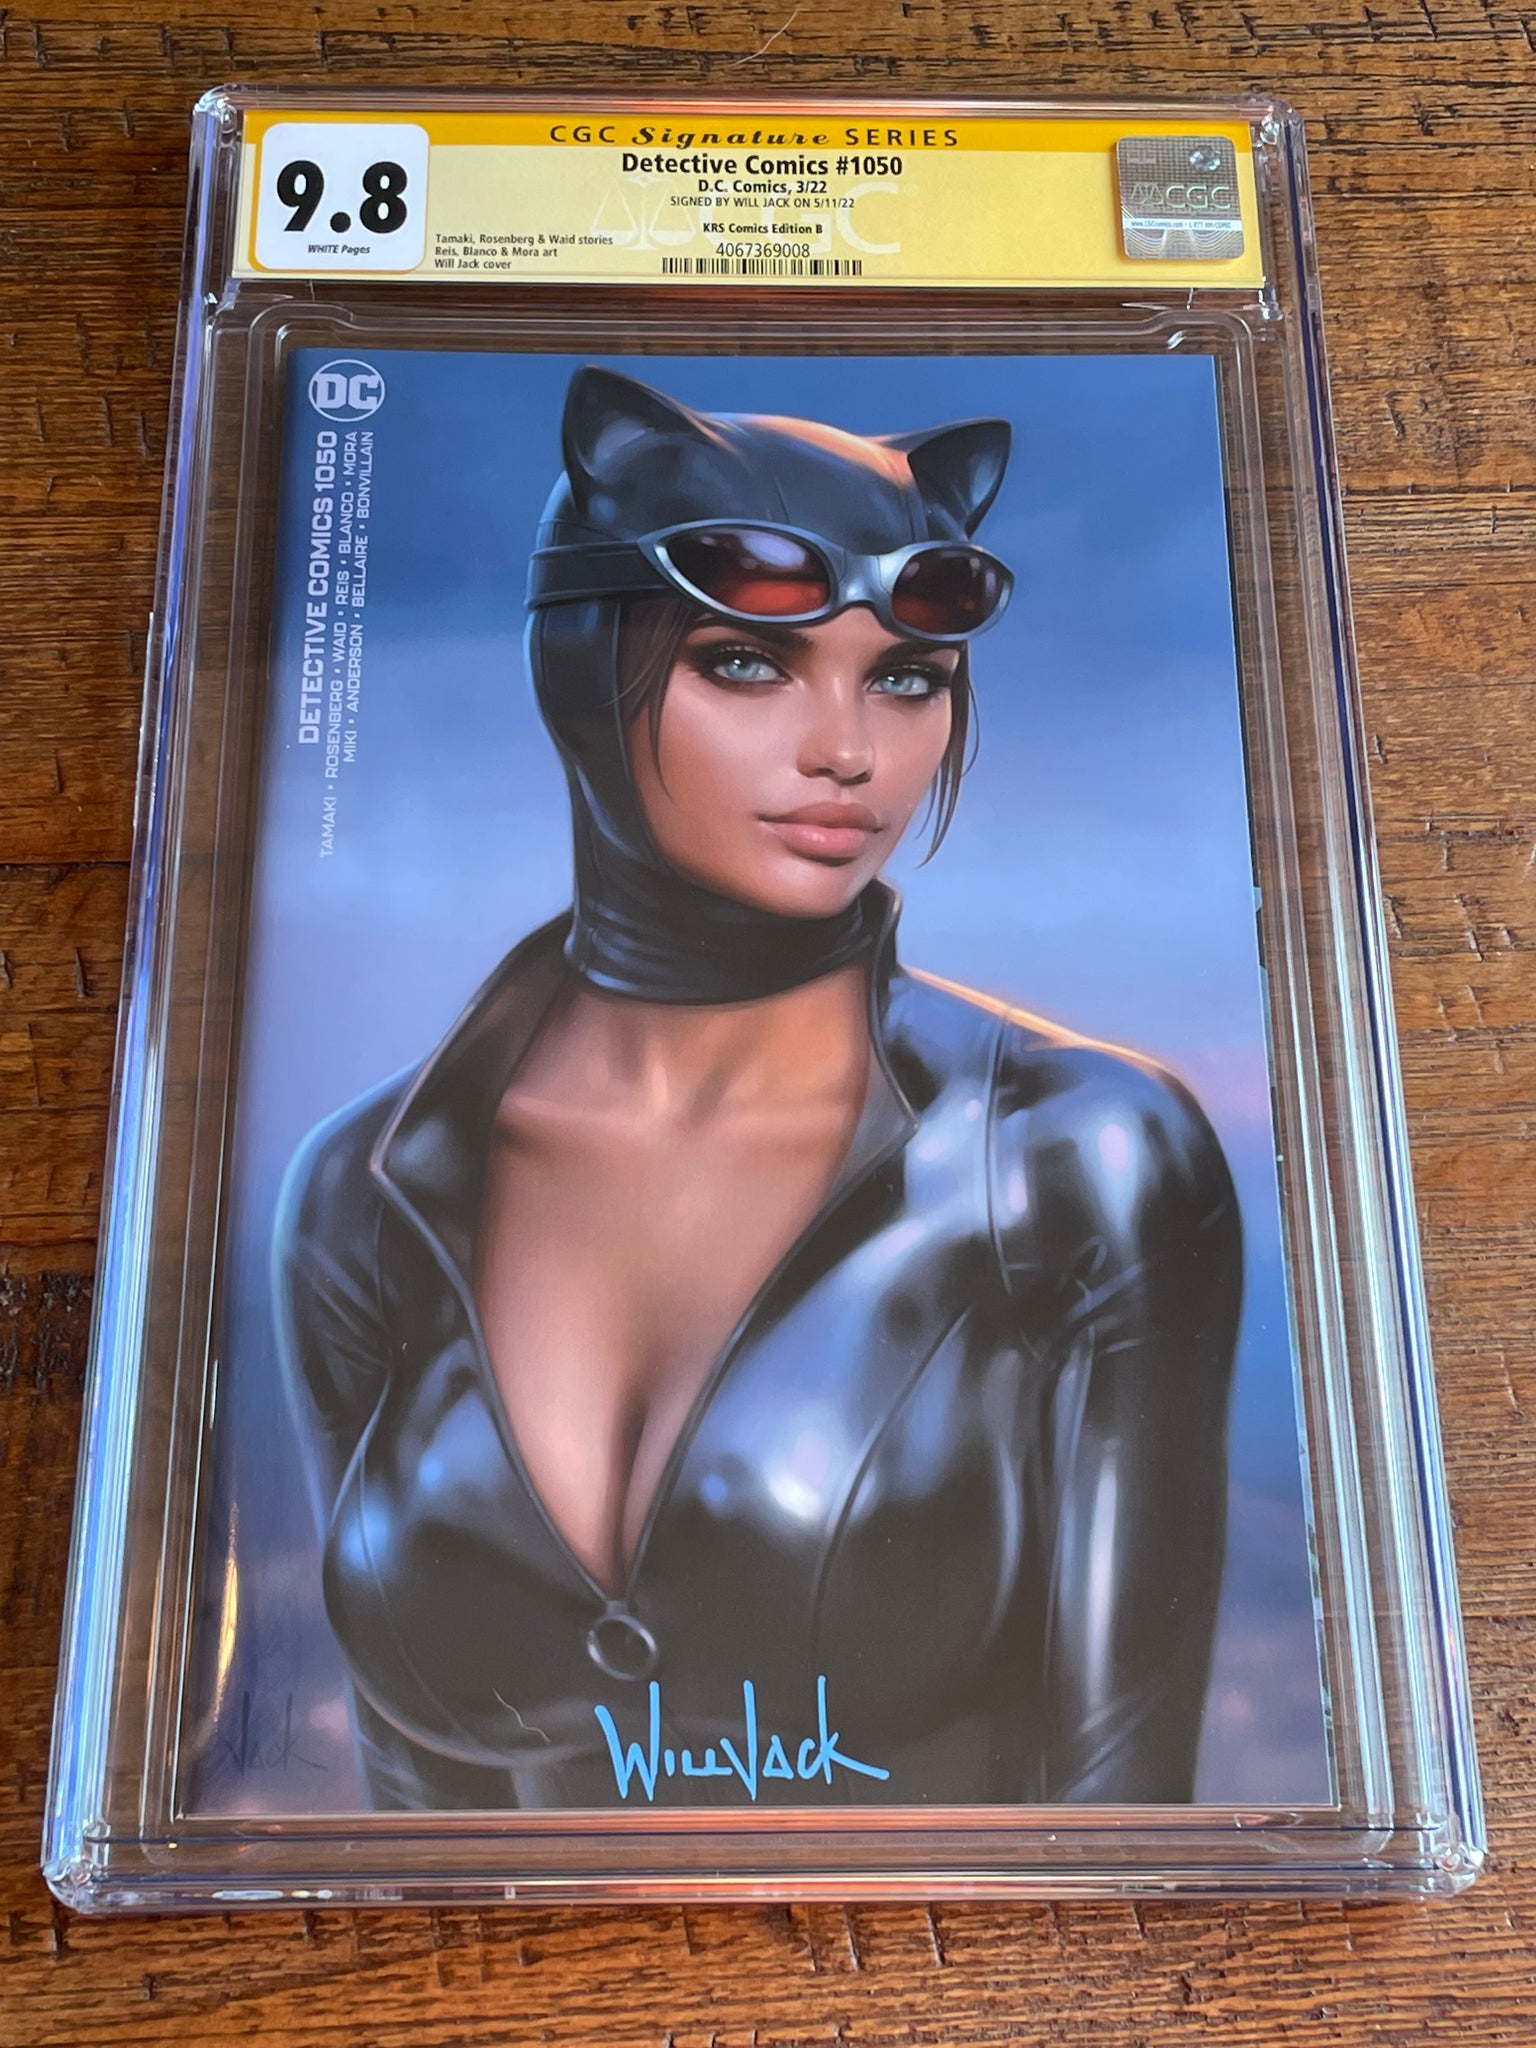 DETECTIVE COMICS #1050 CGC SS 9.8 WILL JACK SIGNED CATWOMAN VIRGIN VARIANT-B